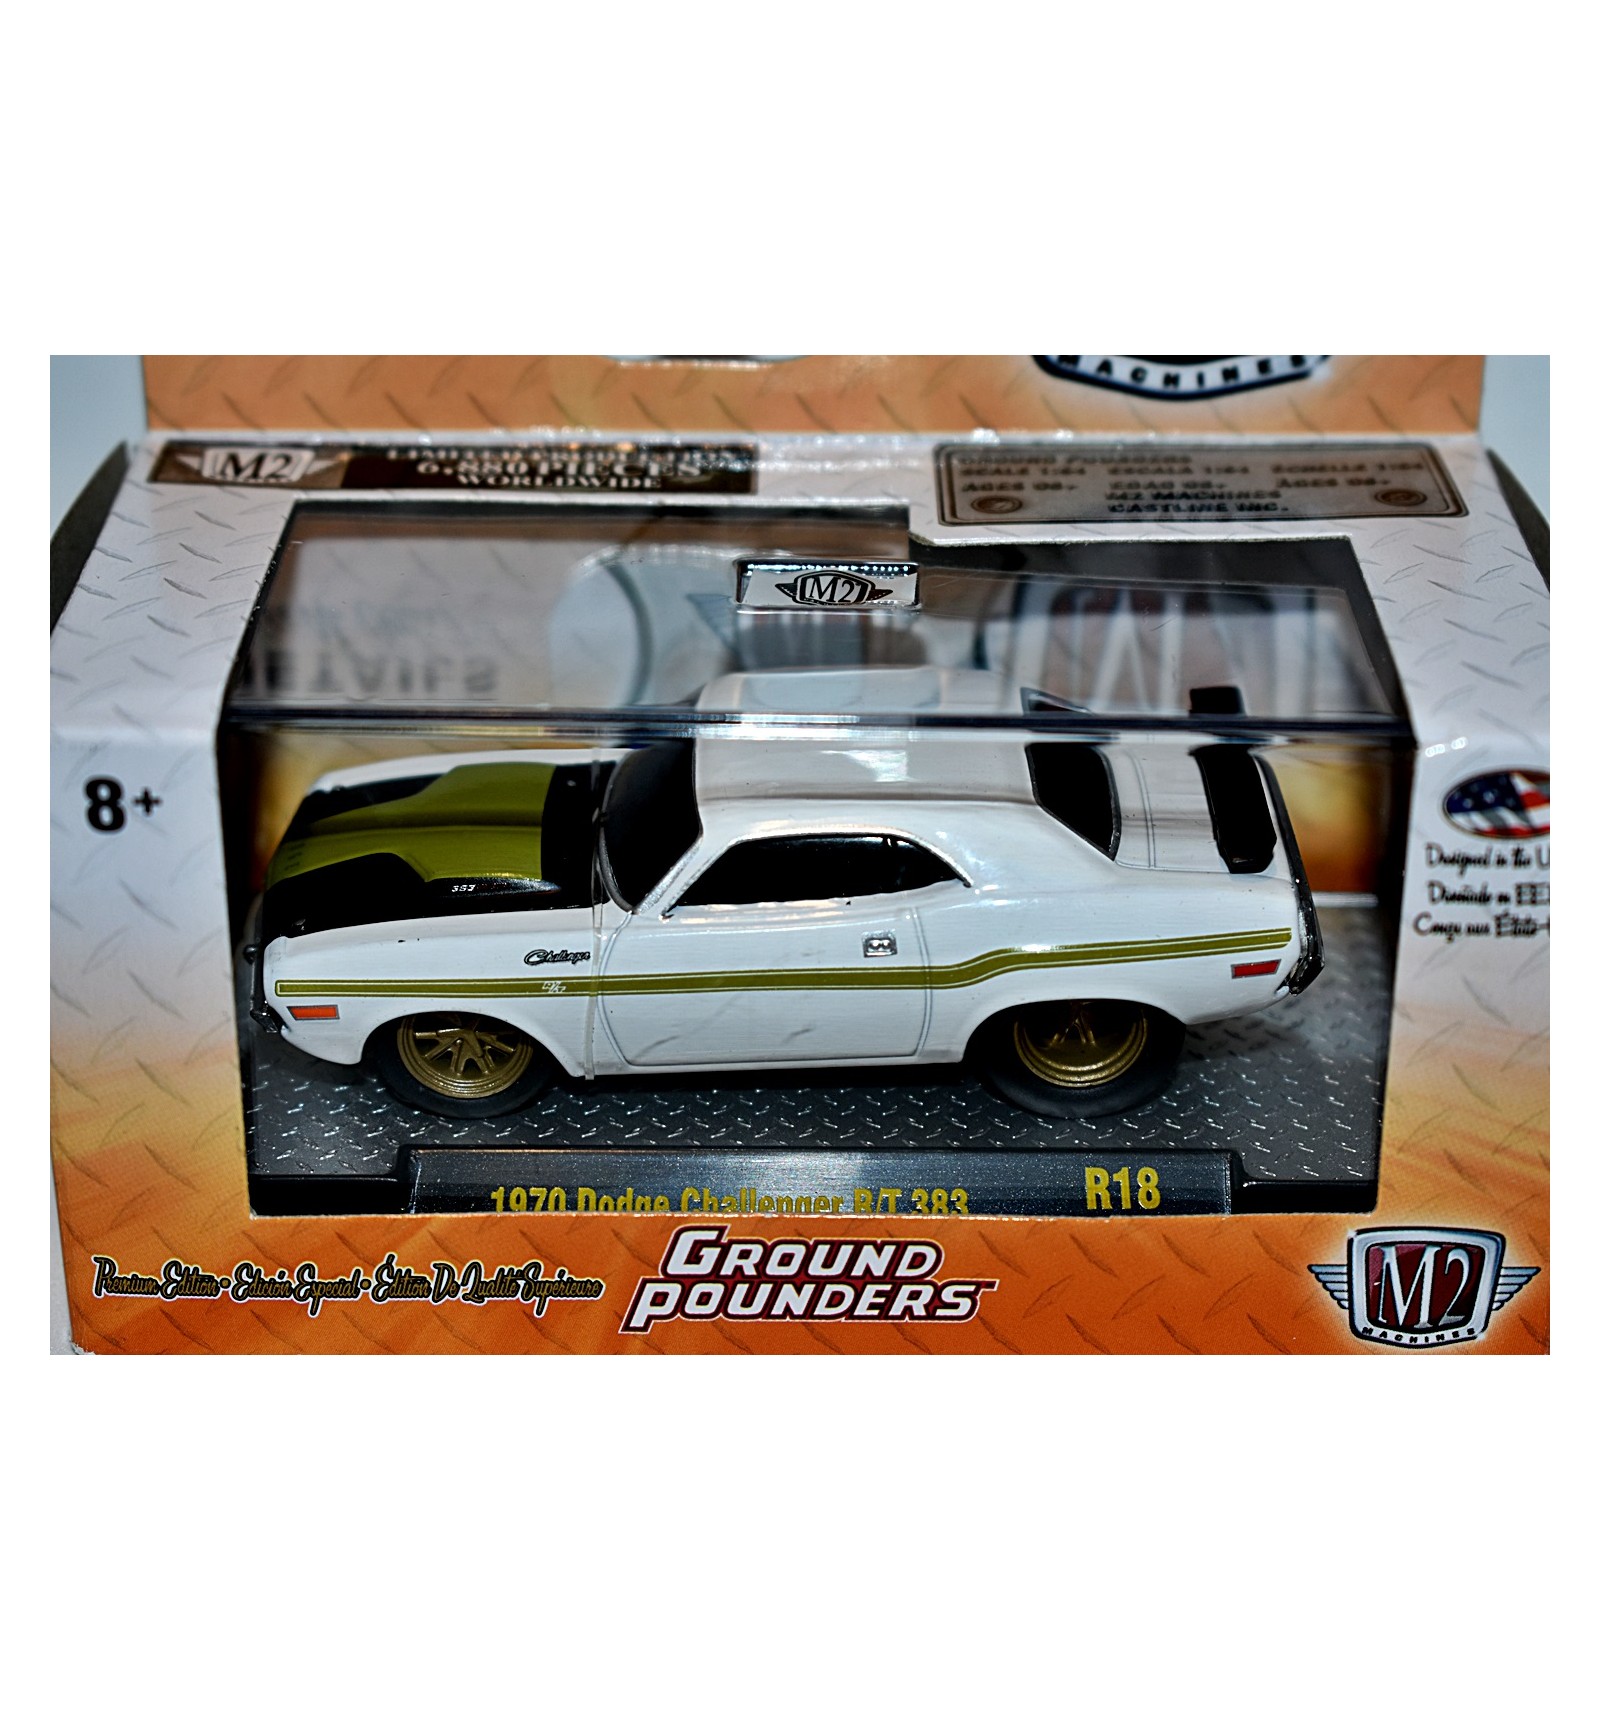 M2 CHASE GROUND POUNDERS SERIES 9 1970 DODGE CHALLENGER RT 